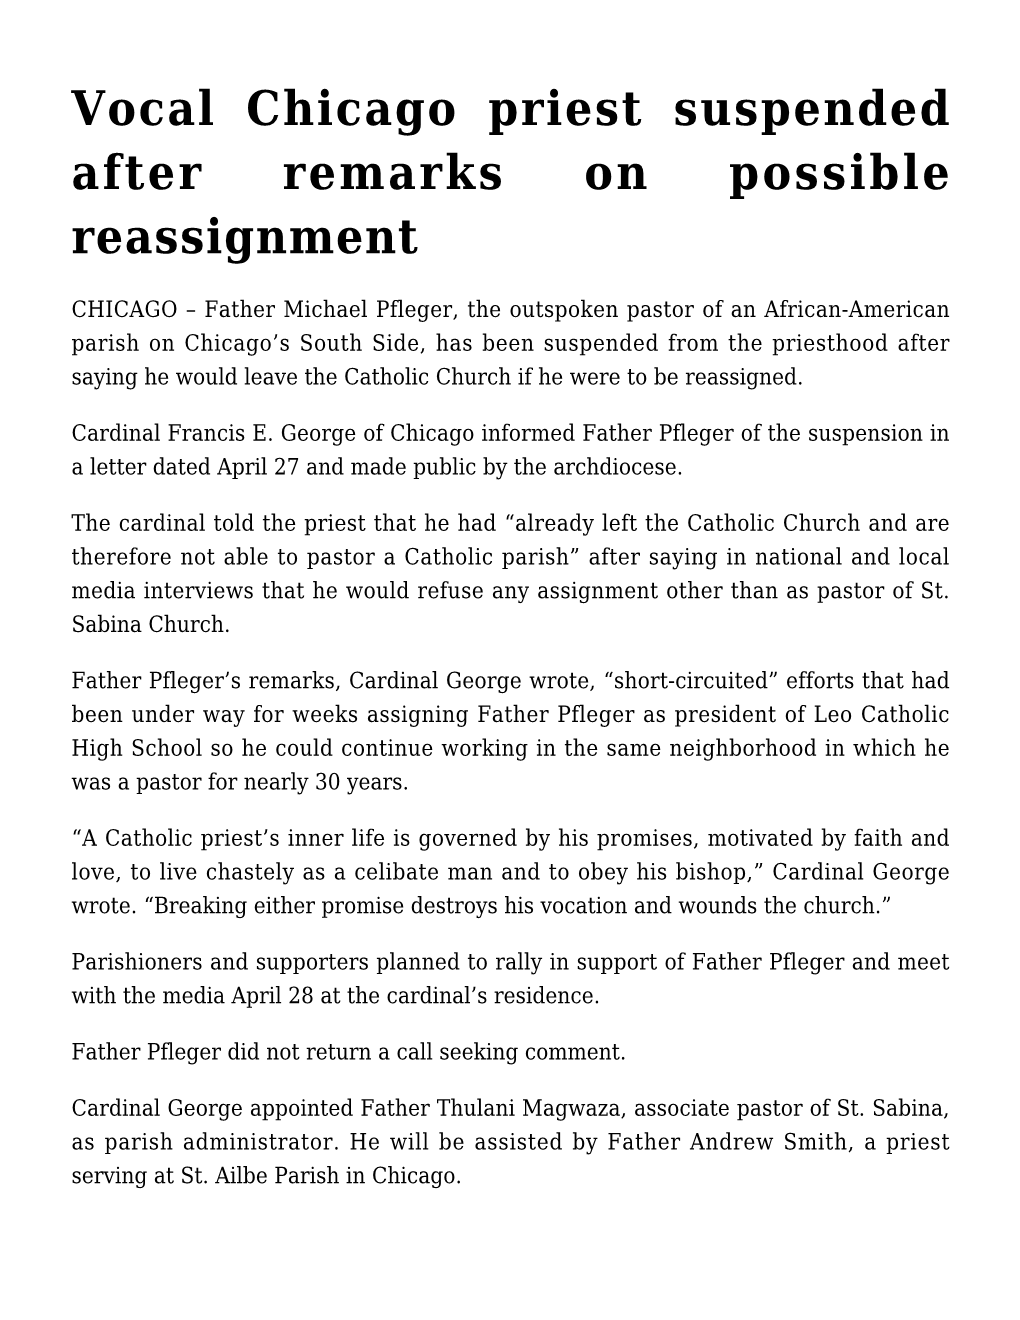 Vocal Chicago Priest Suspended After Remarks on Possible Reassignment